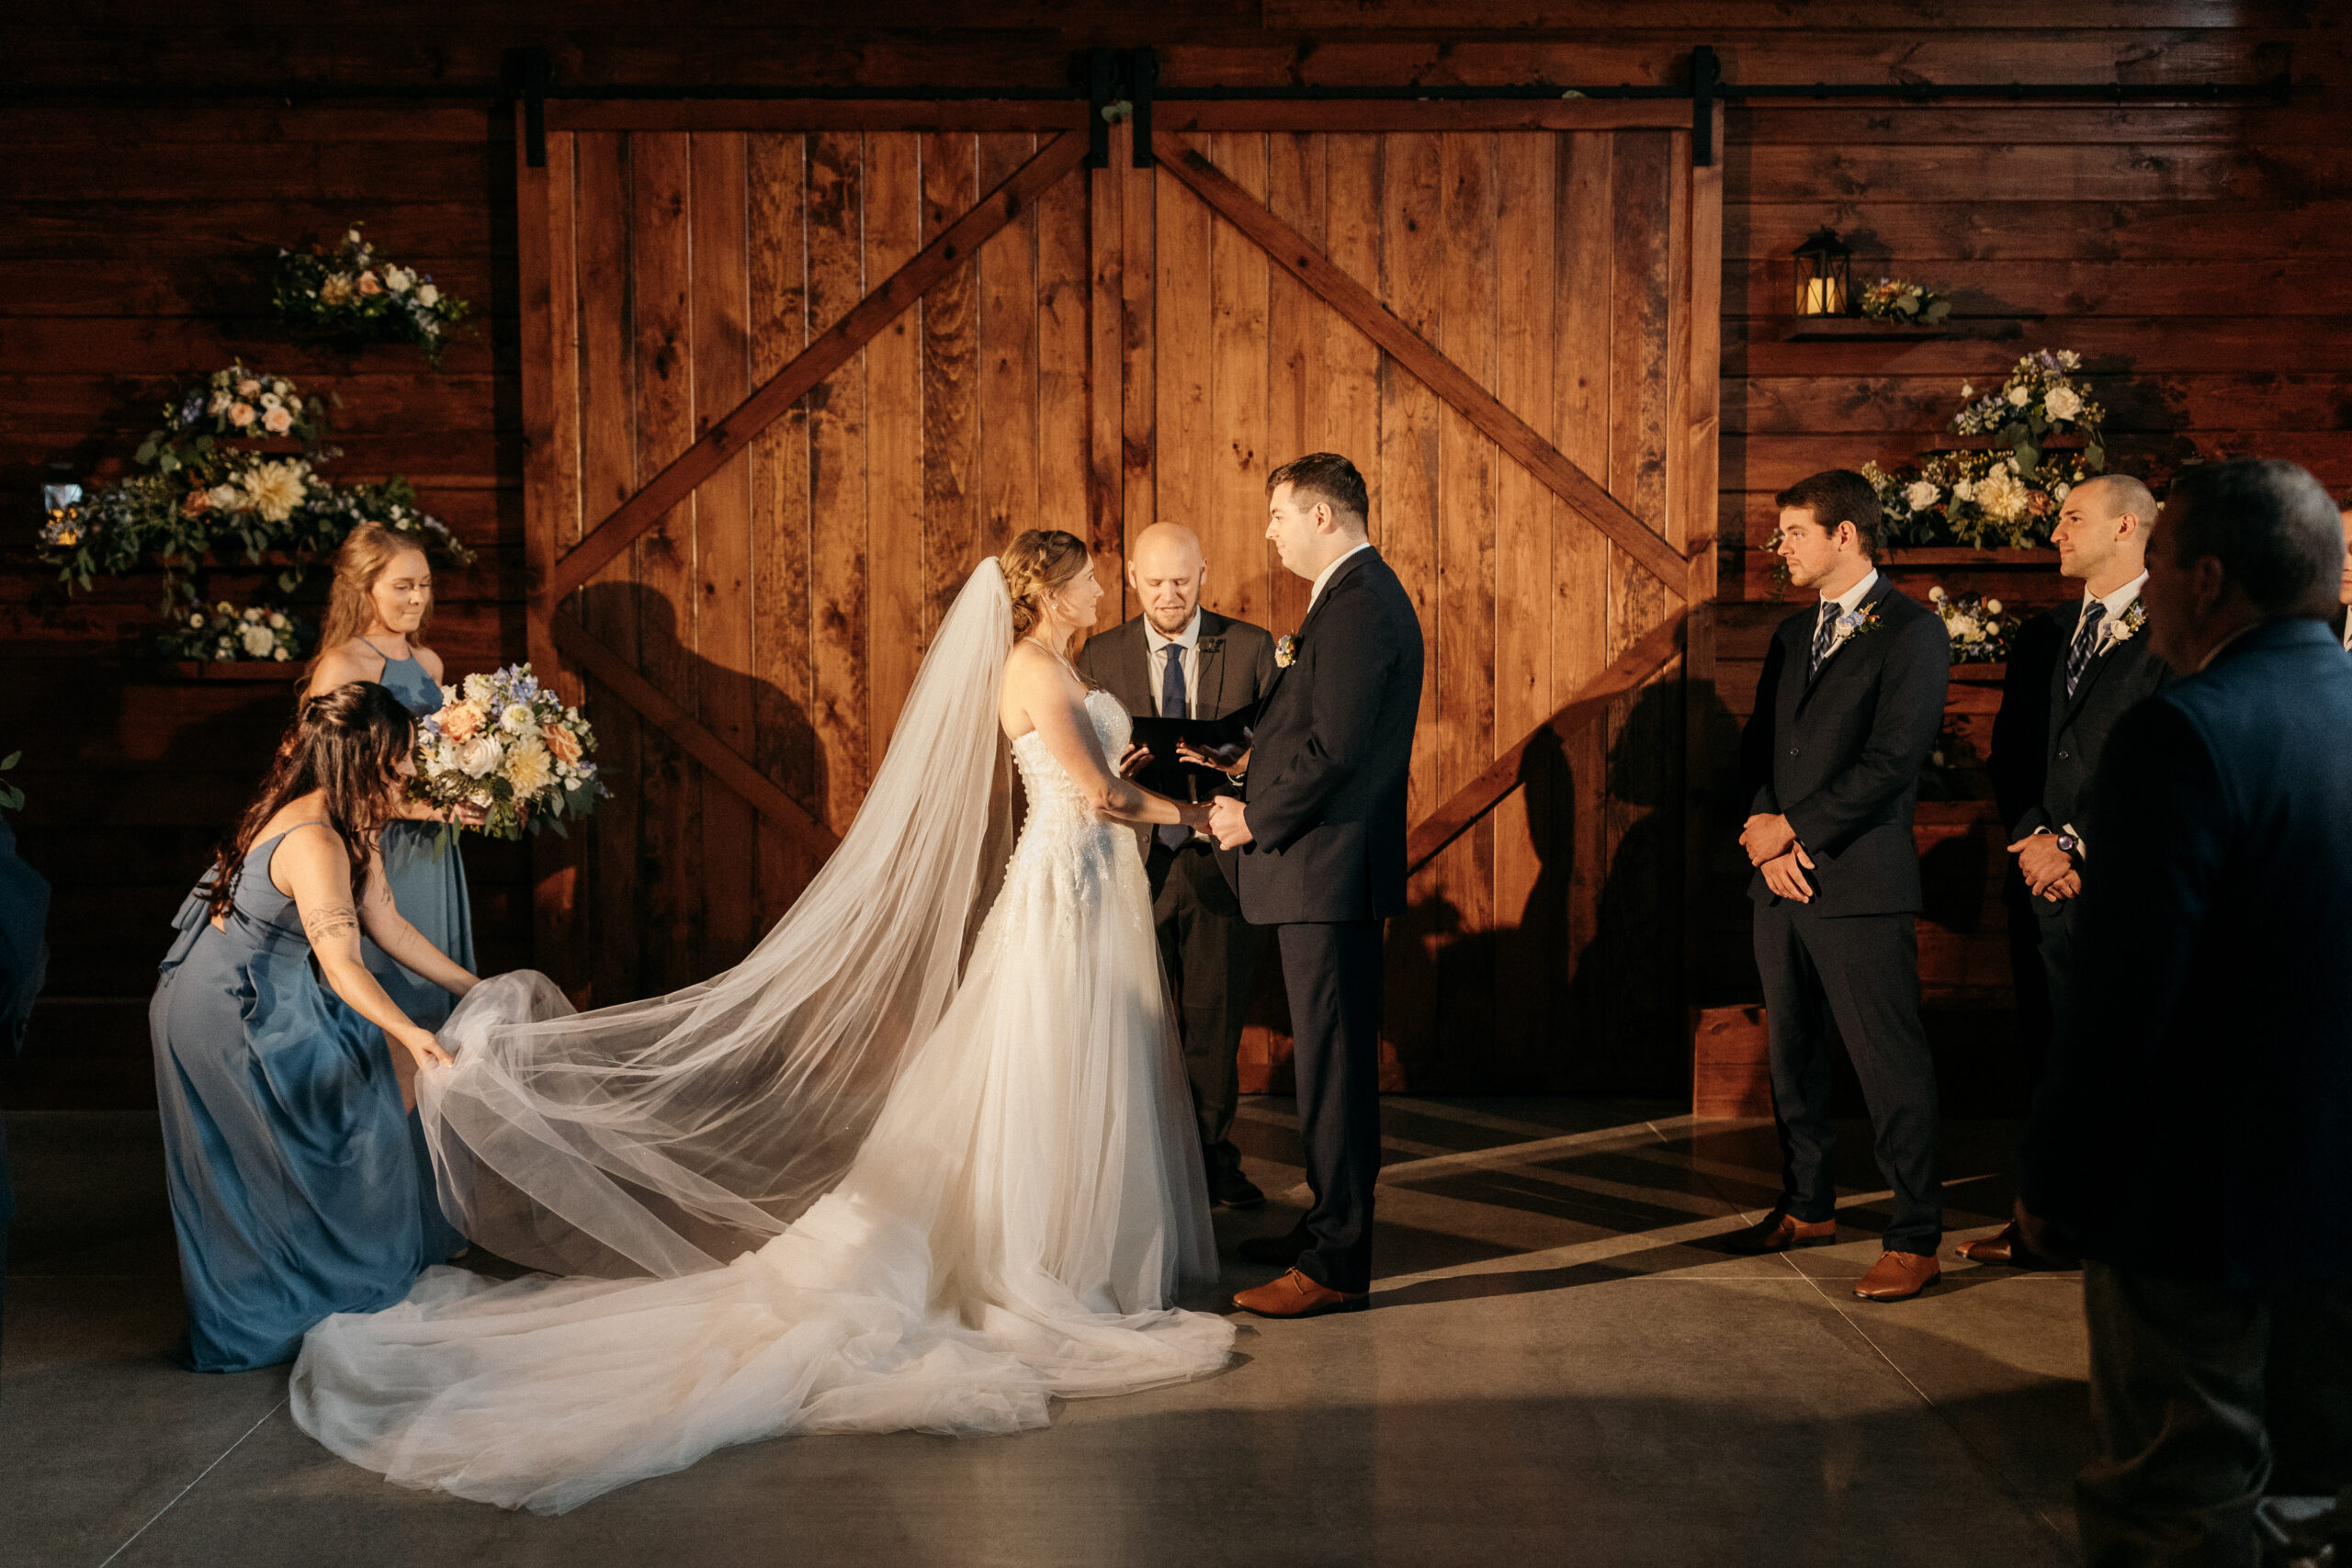 Bride and Groom saying I do at the alter in a rustic barn setting. The maid of honor holding up the bride's veil and the bride and groom holding hands, looking into each others eyes.